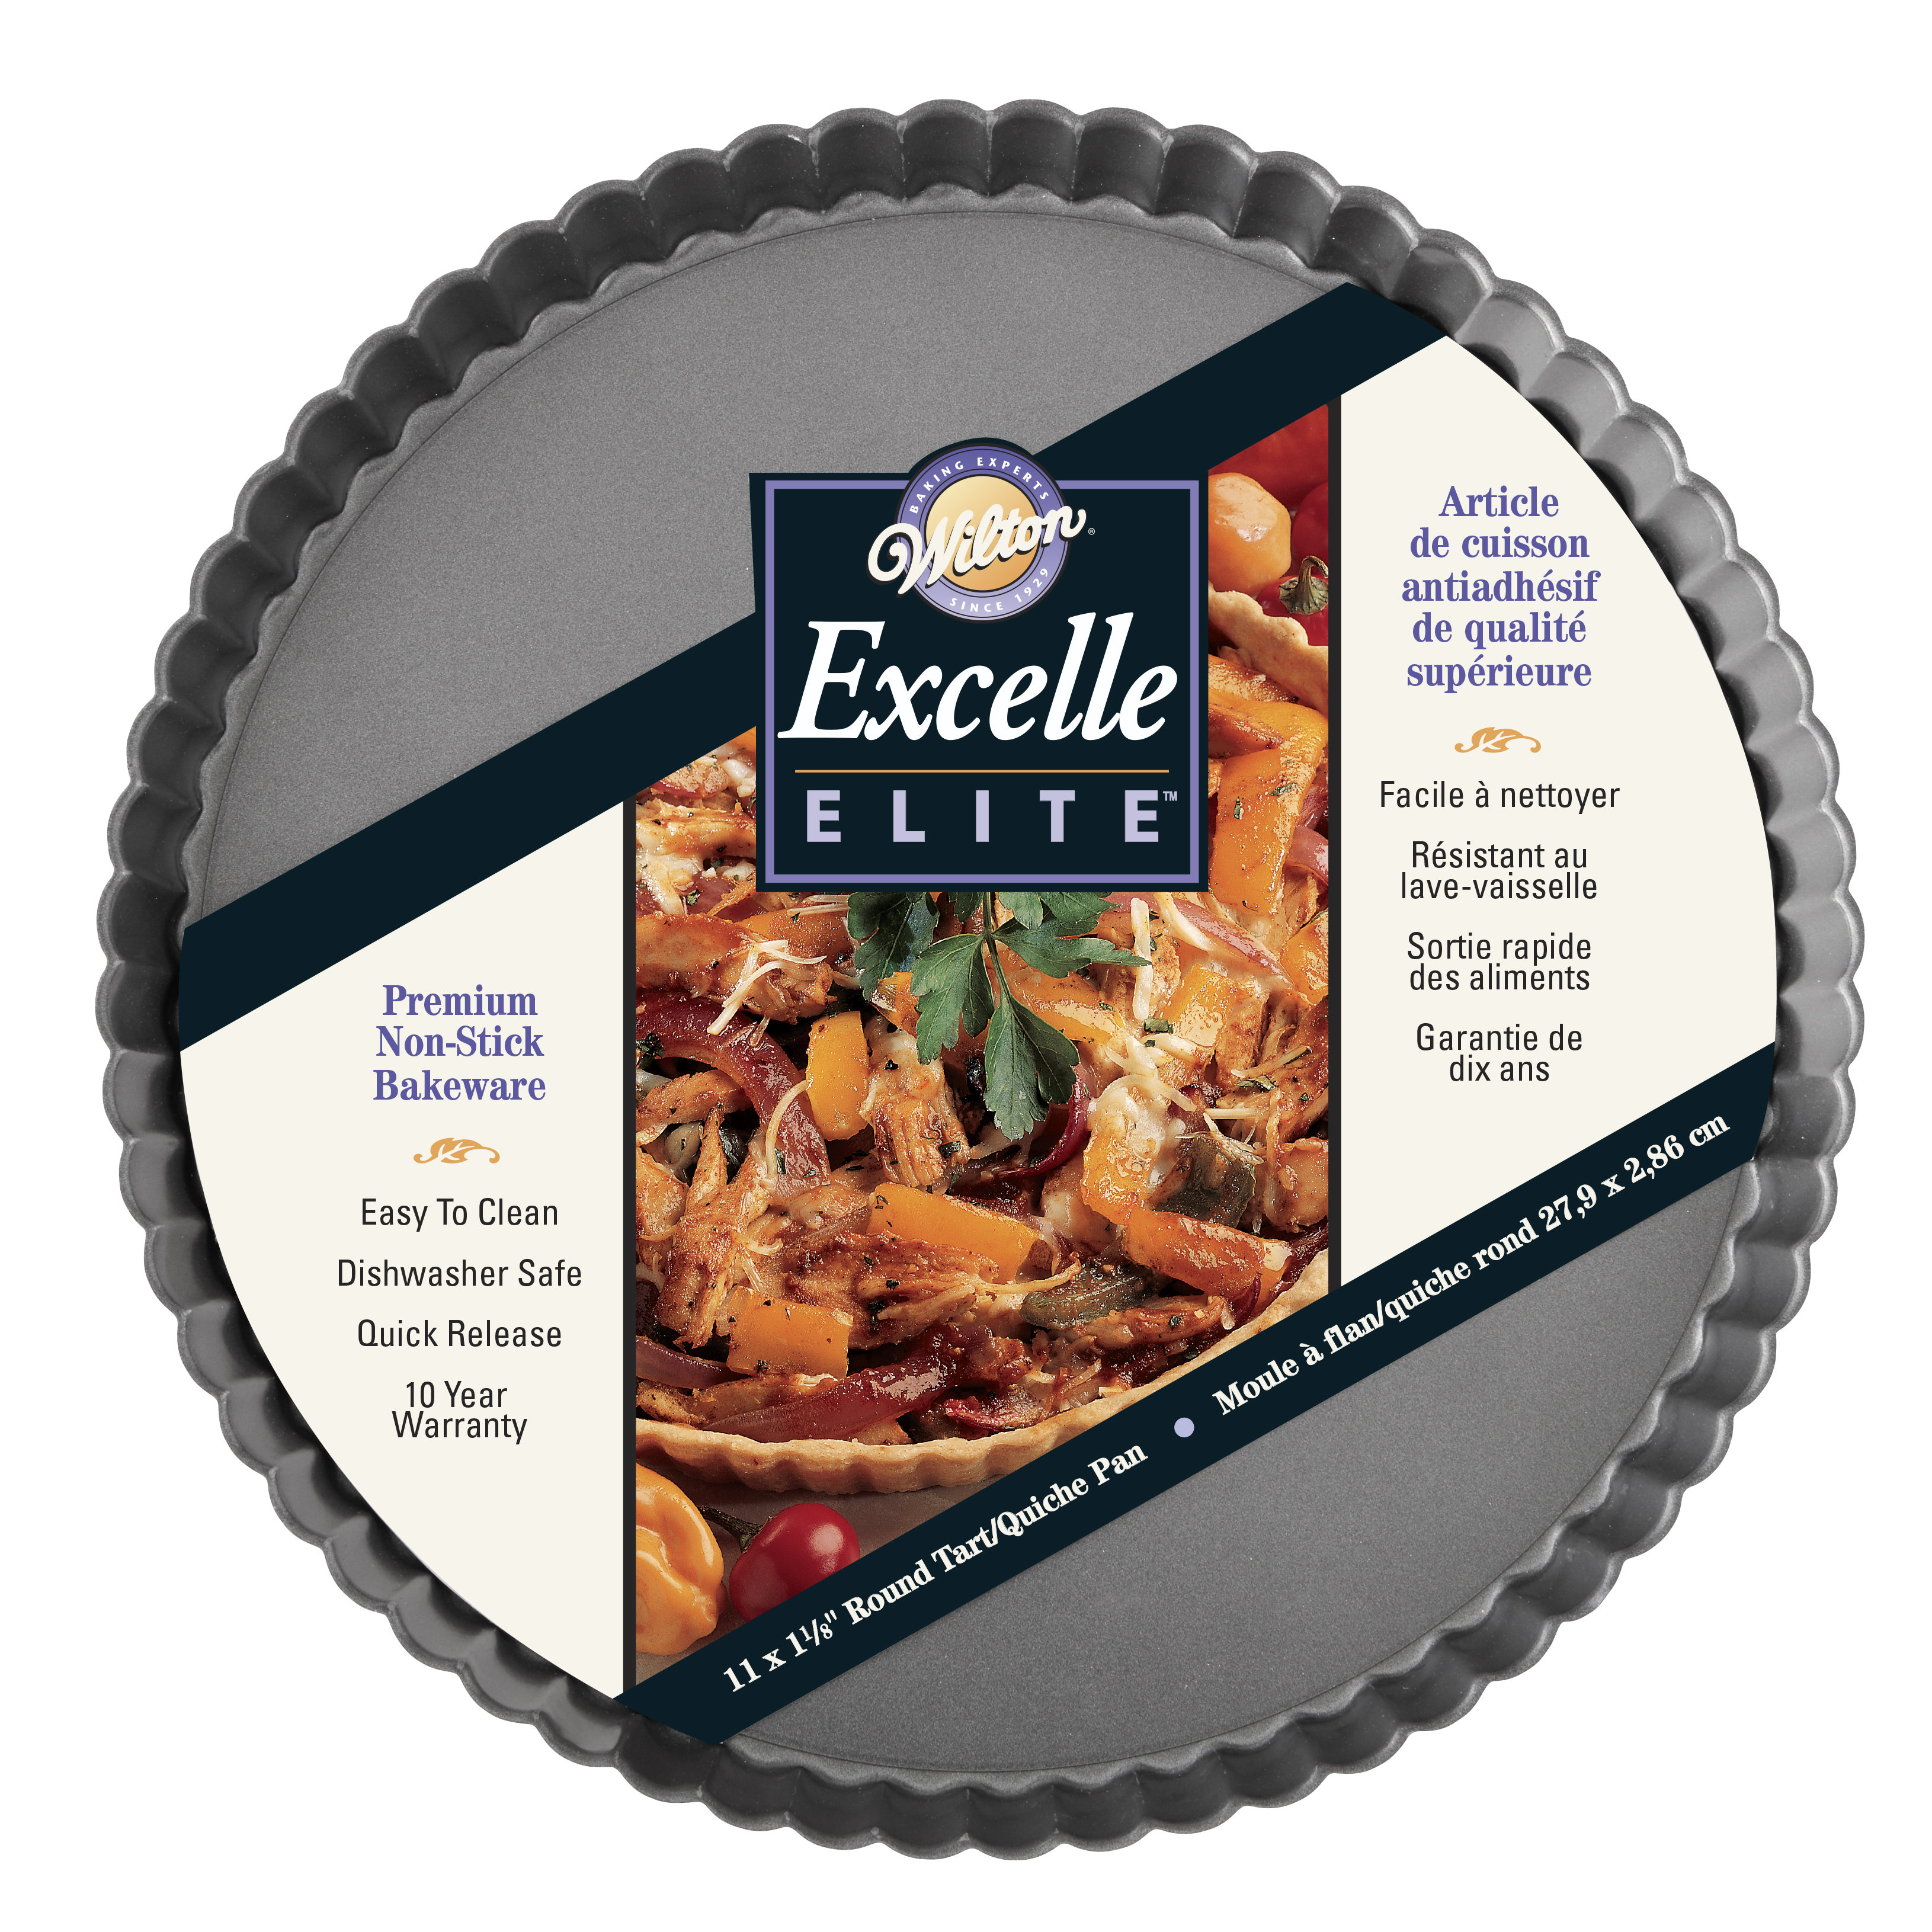 Wilton Excelle Elite Non-Stick Tart and Quiche Pan with Removable Bottom 9-Inch 